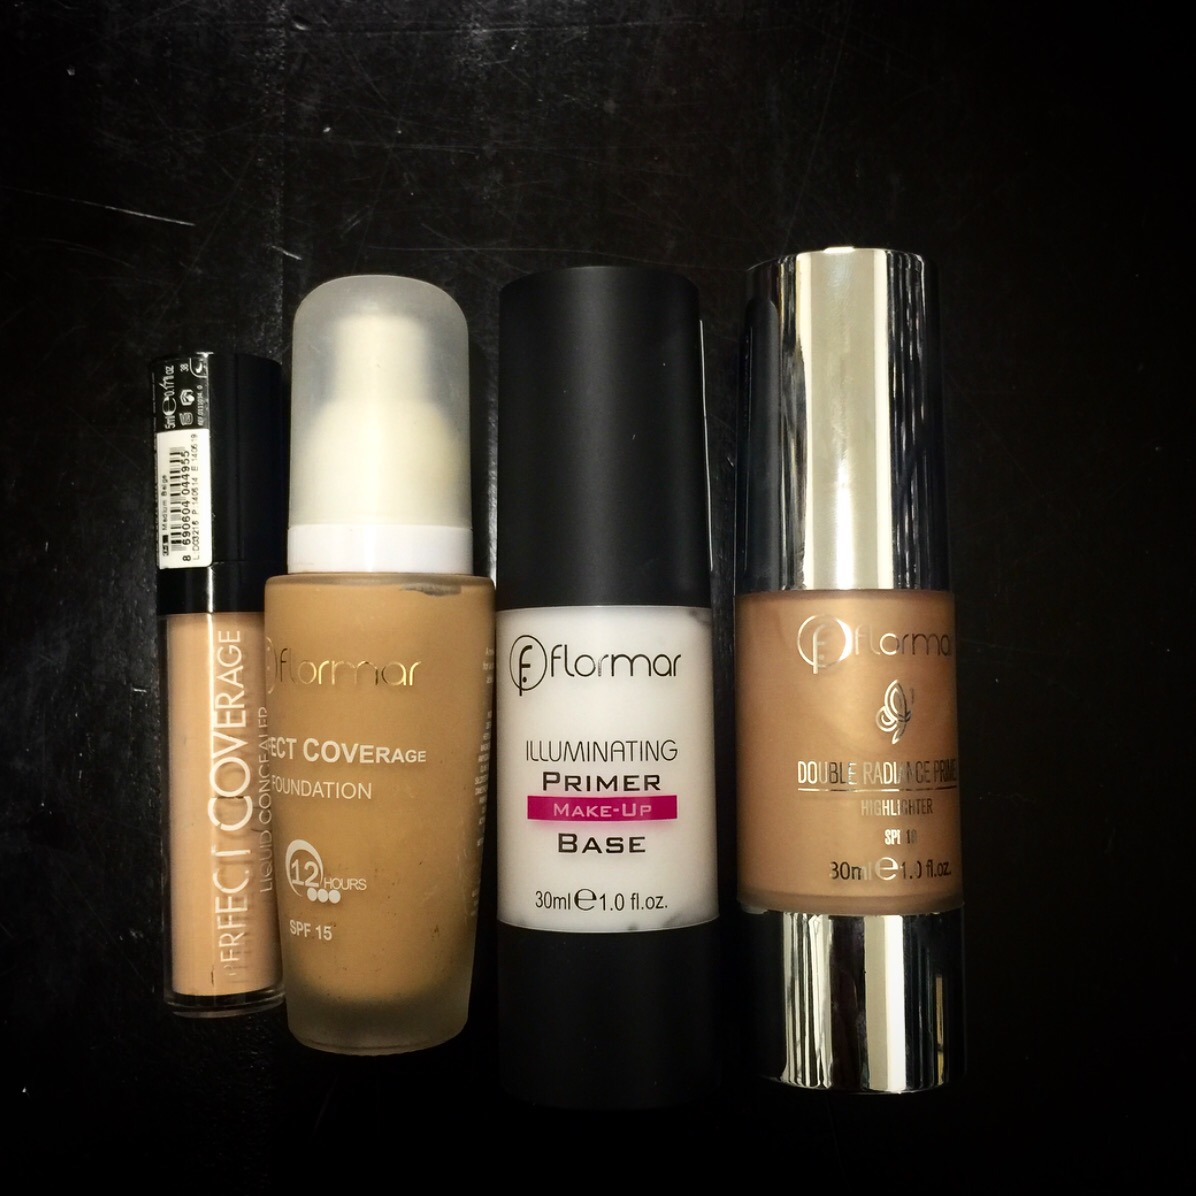 Flormar Perfect Coverage Foundation SPF15